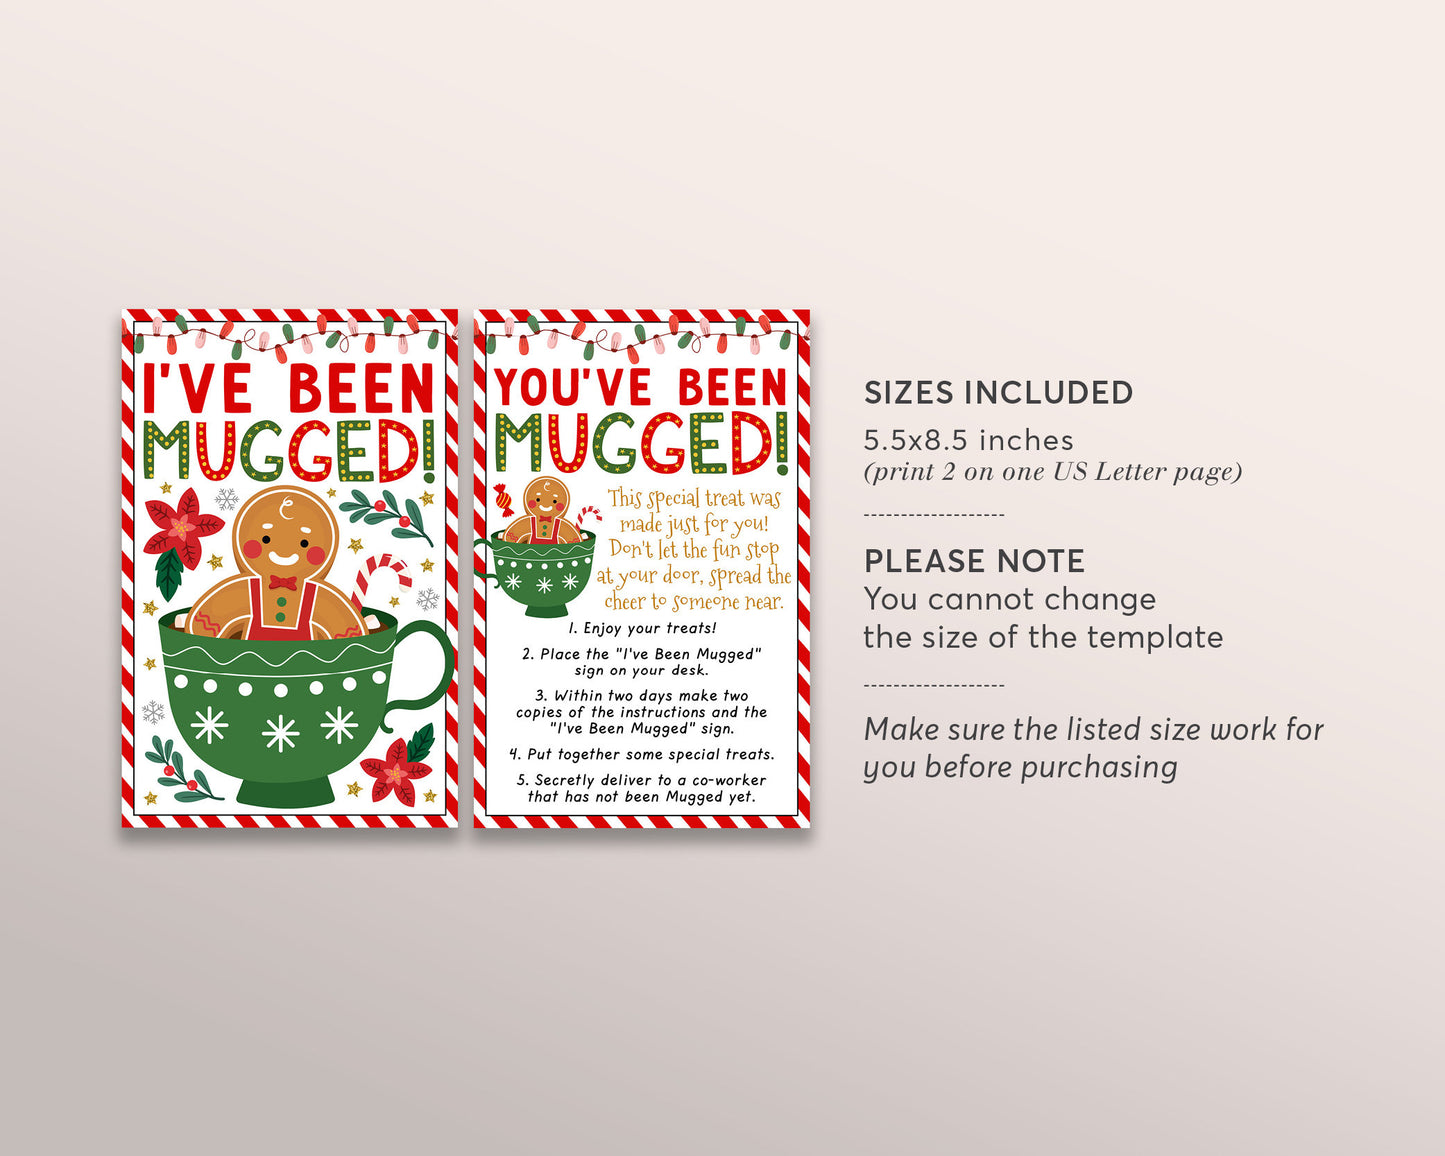 We've Been Mugged Christmas Coworker Office Party Game Editable Template, I've Been Mugged Holiday Winter Sign Instructions Printable DIY